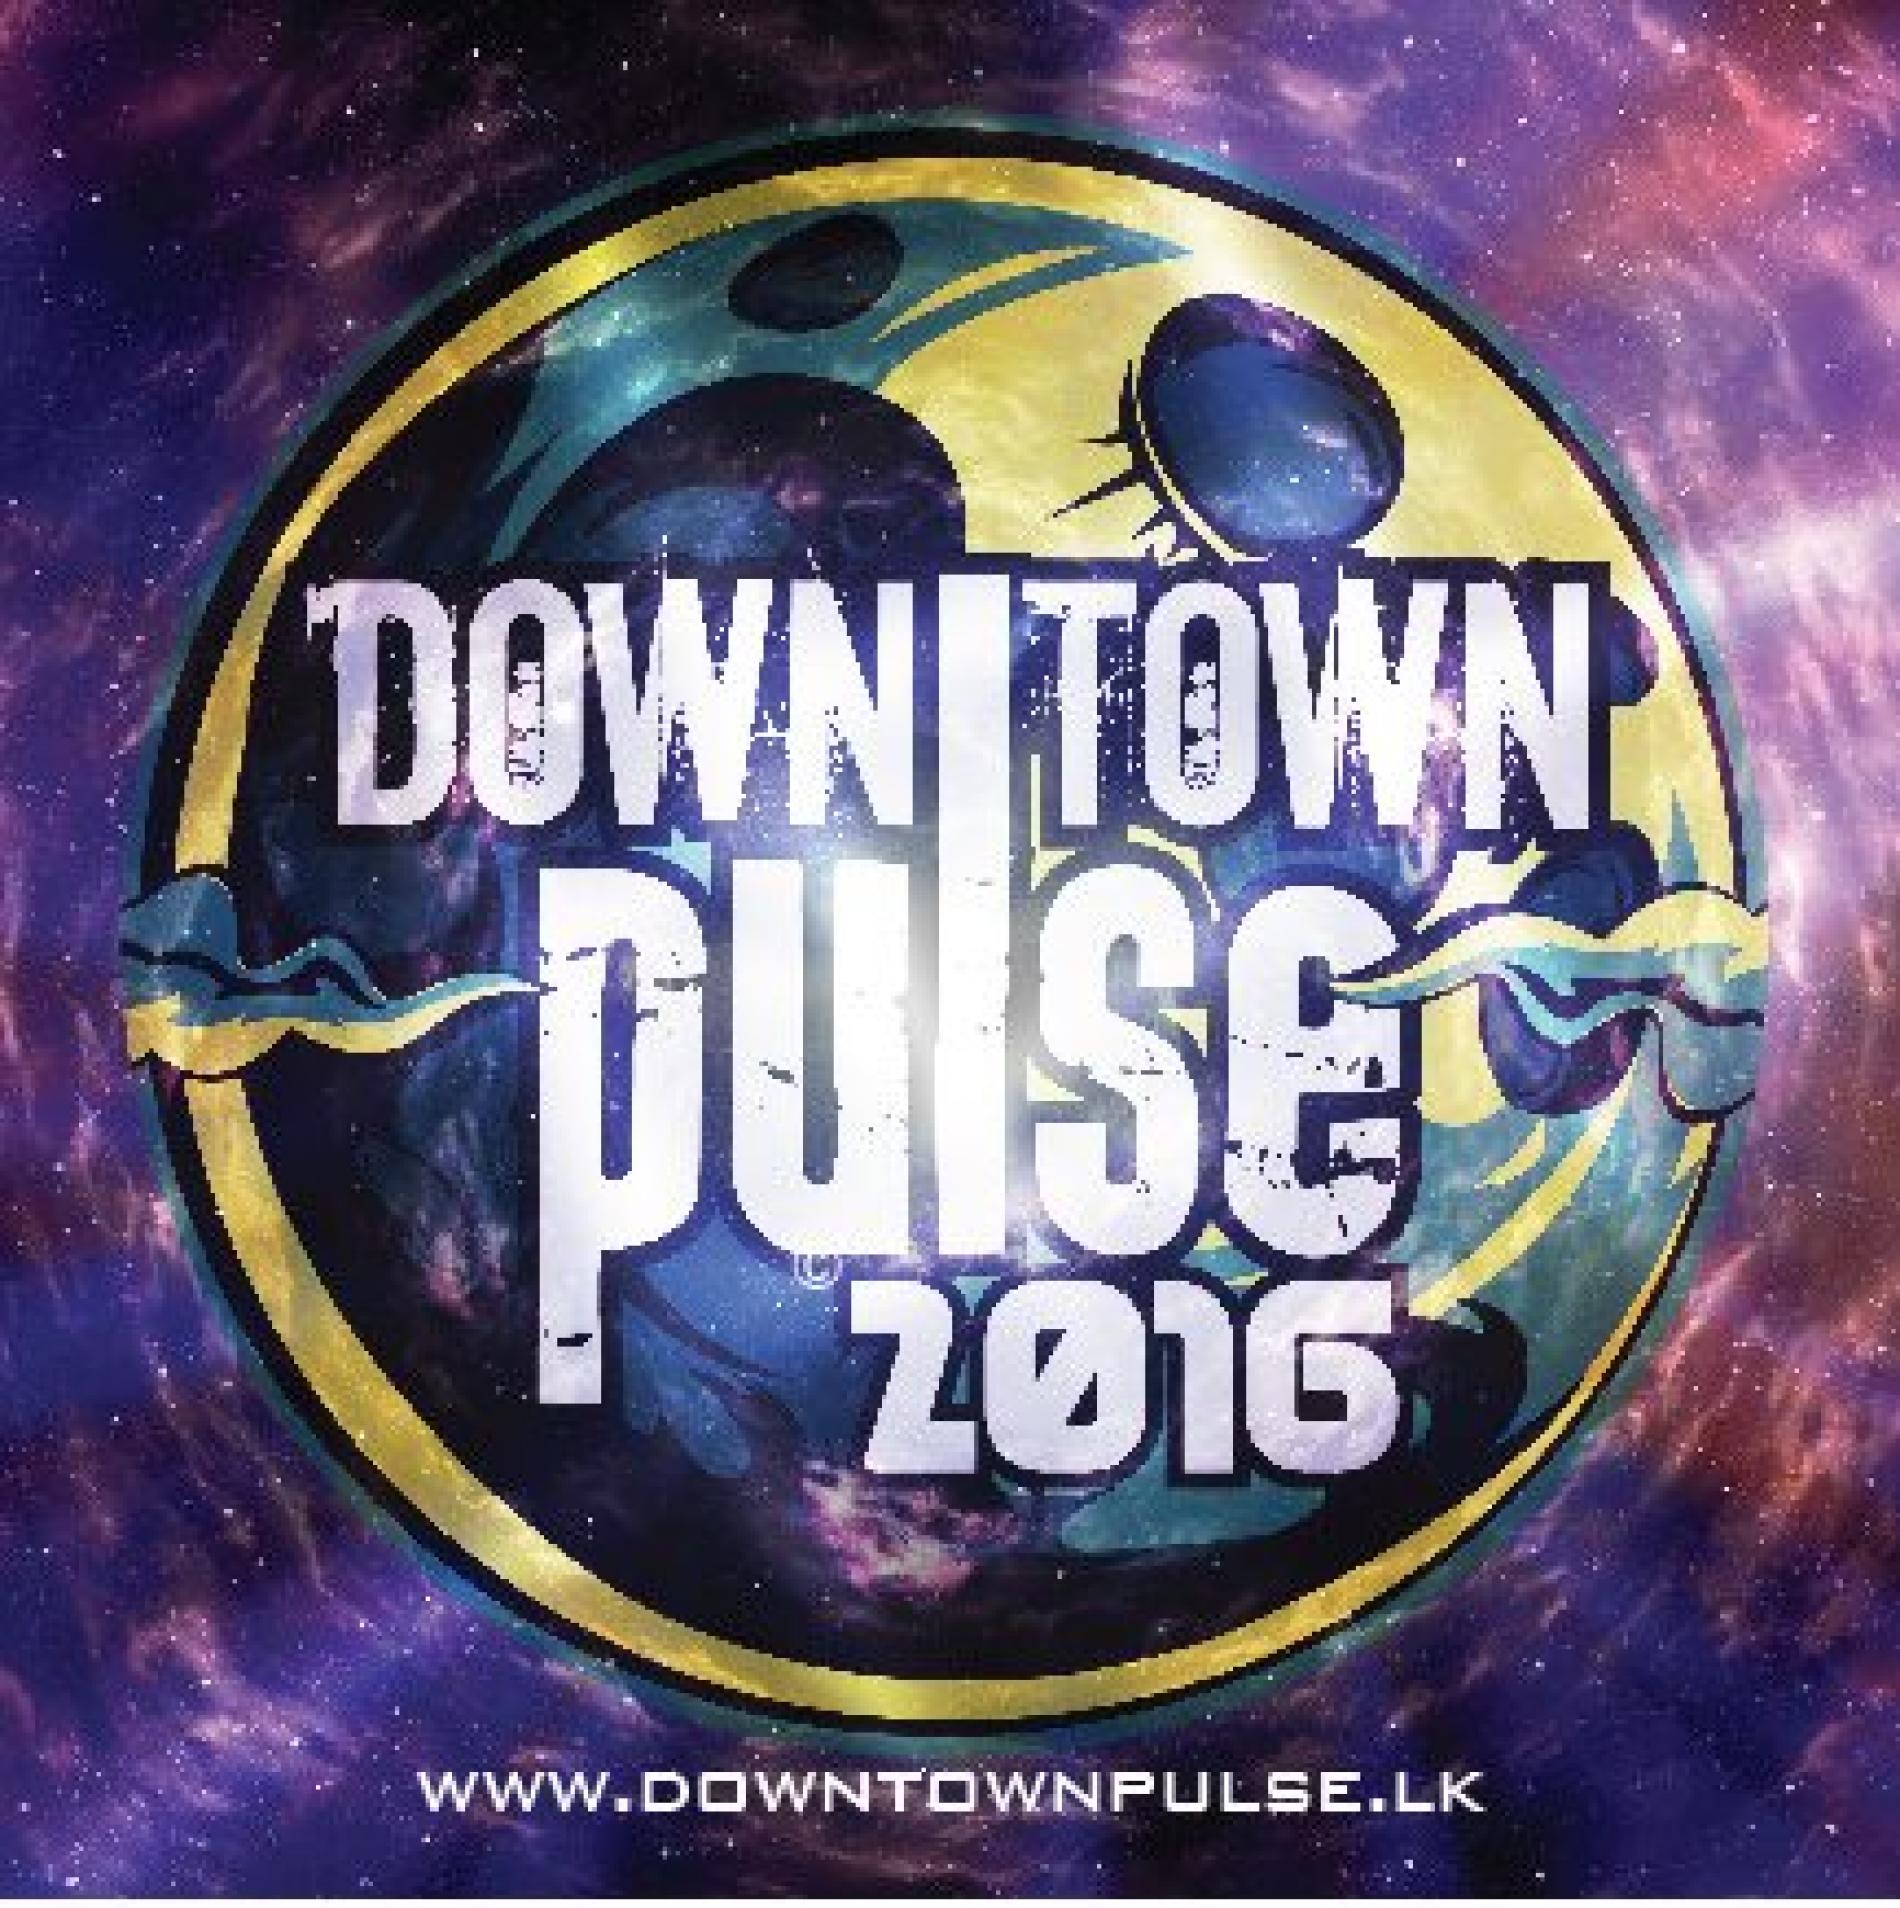 The Line Up So Far For Down Town Pulse